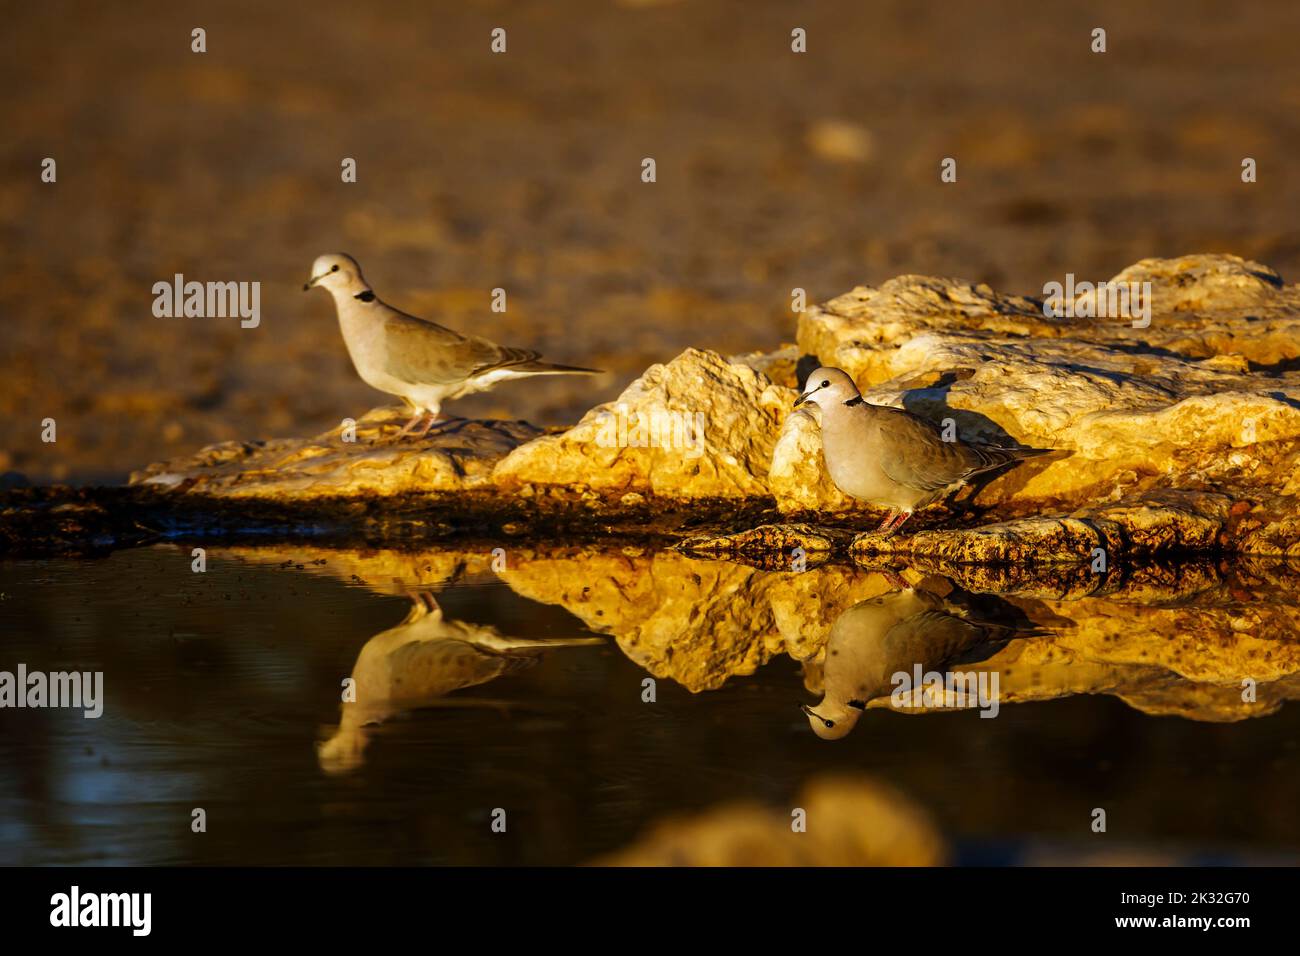 Two Ring-necked Dove in waterhole with reflection at dawn in Kgalagadi transfrontier park, South Africa ; Specie Streptopelia capicola family of Colum Stock Photo